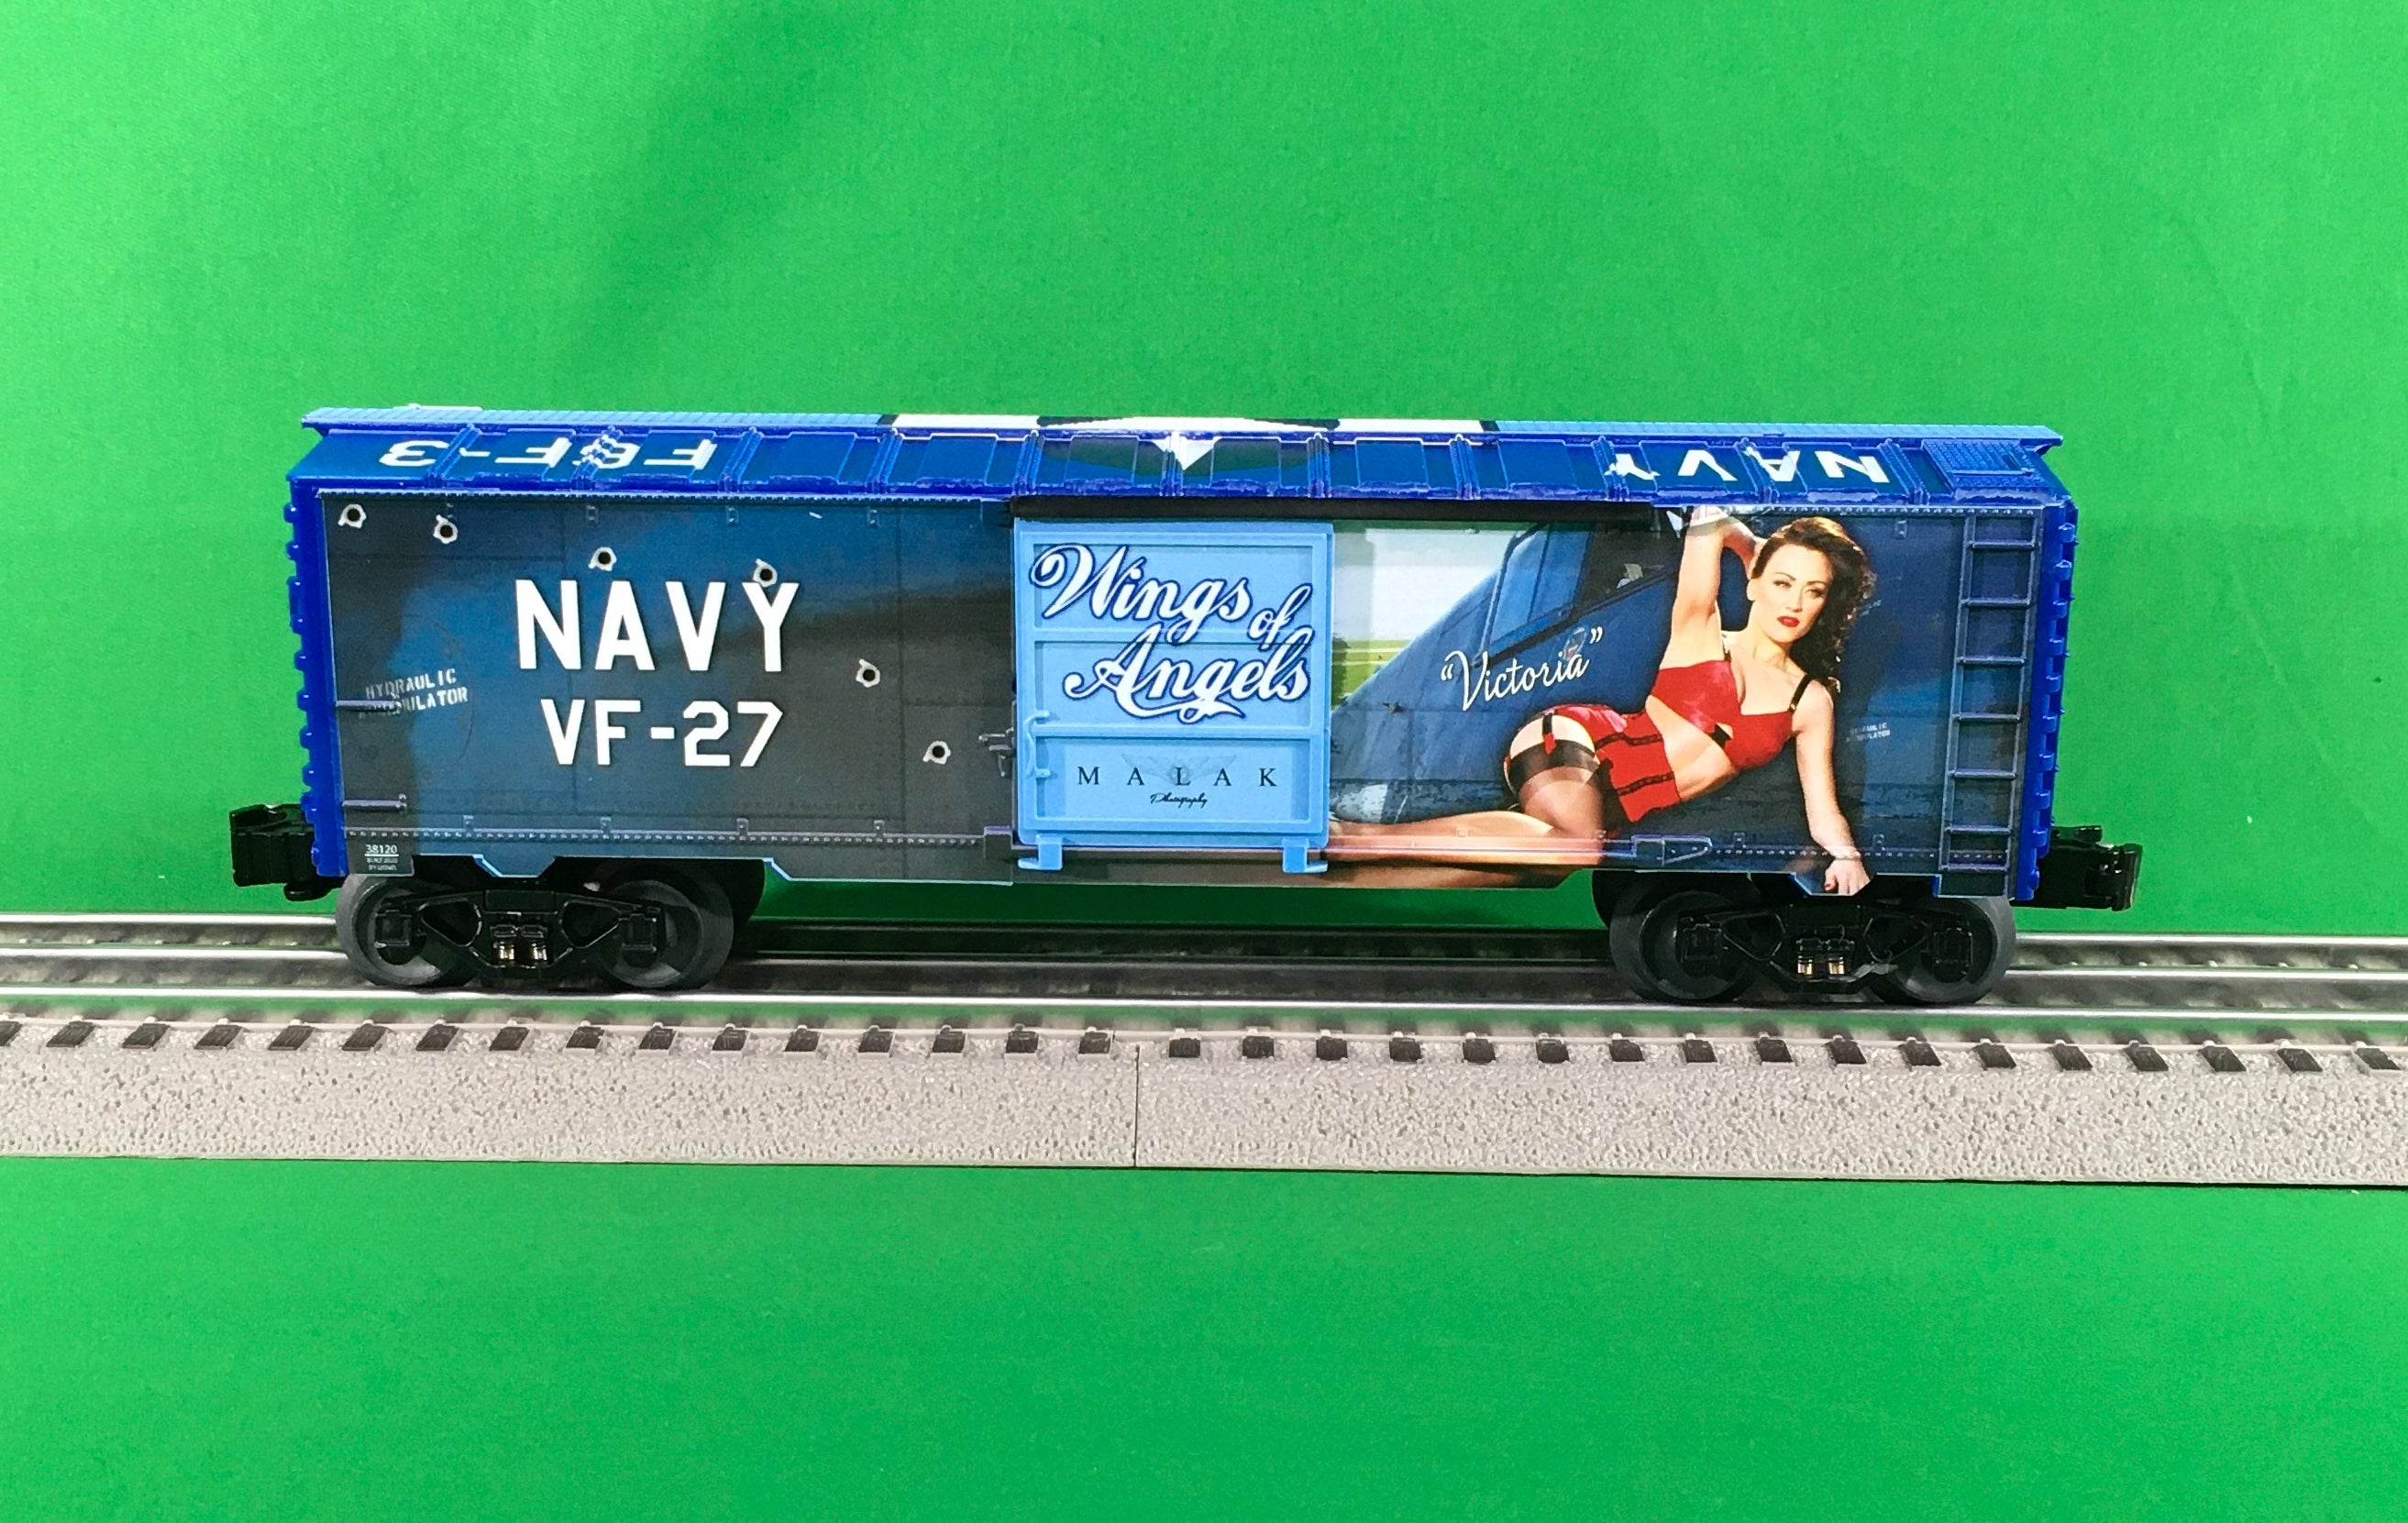 Lionel 2138120 - U.S. Army Boxcar "Wings of Angels - Victoria"